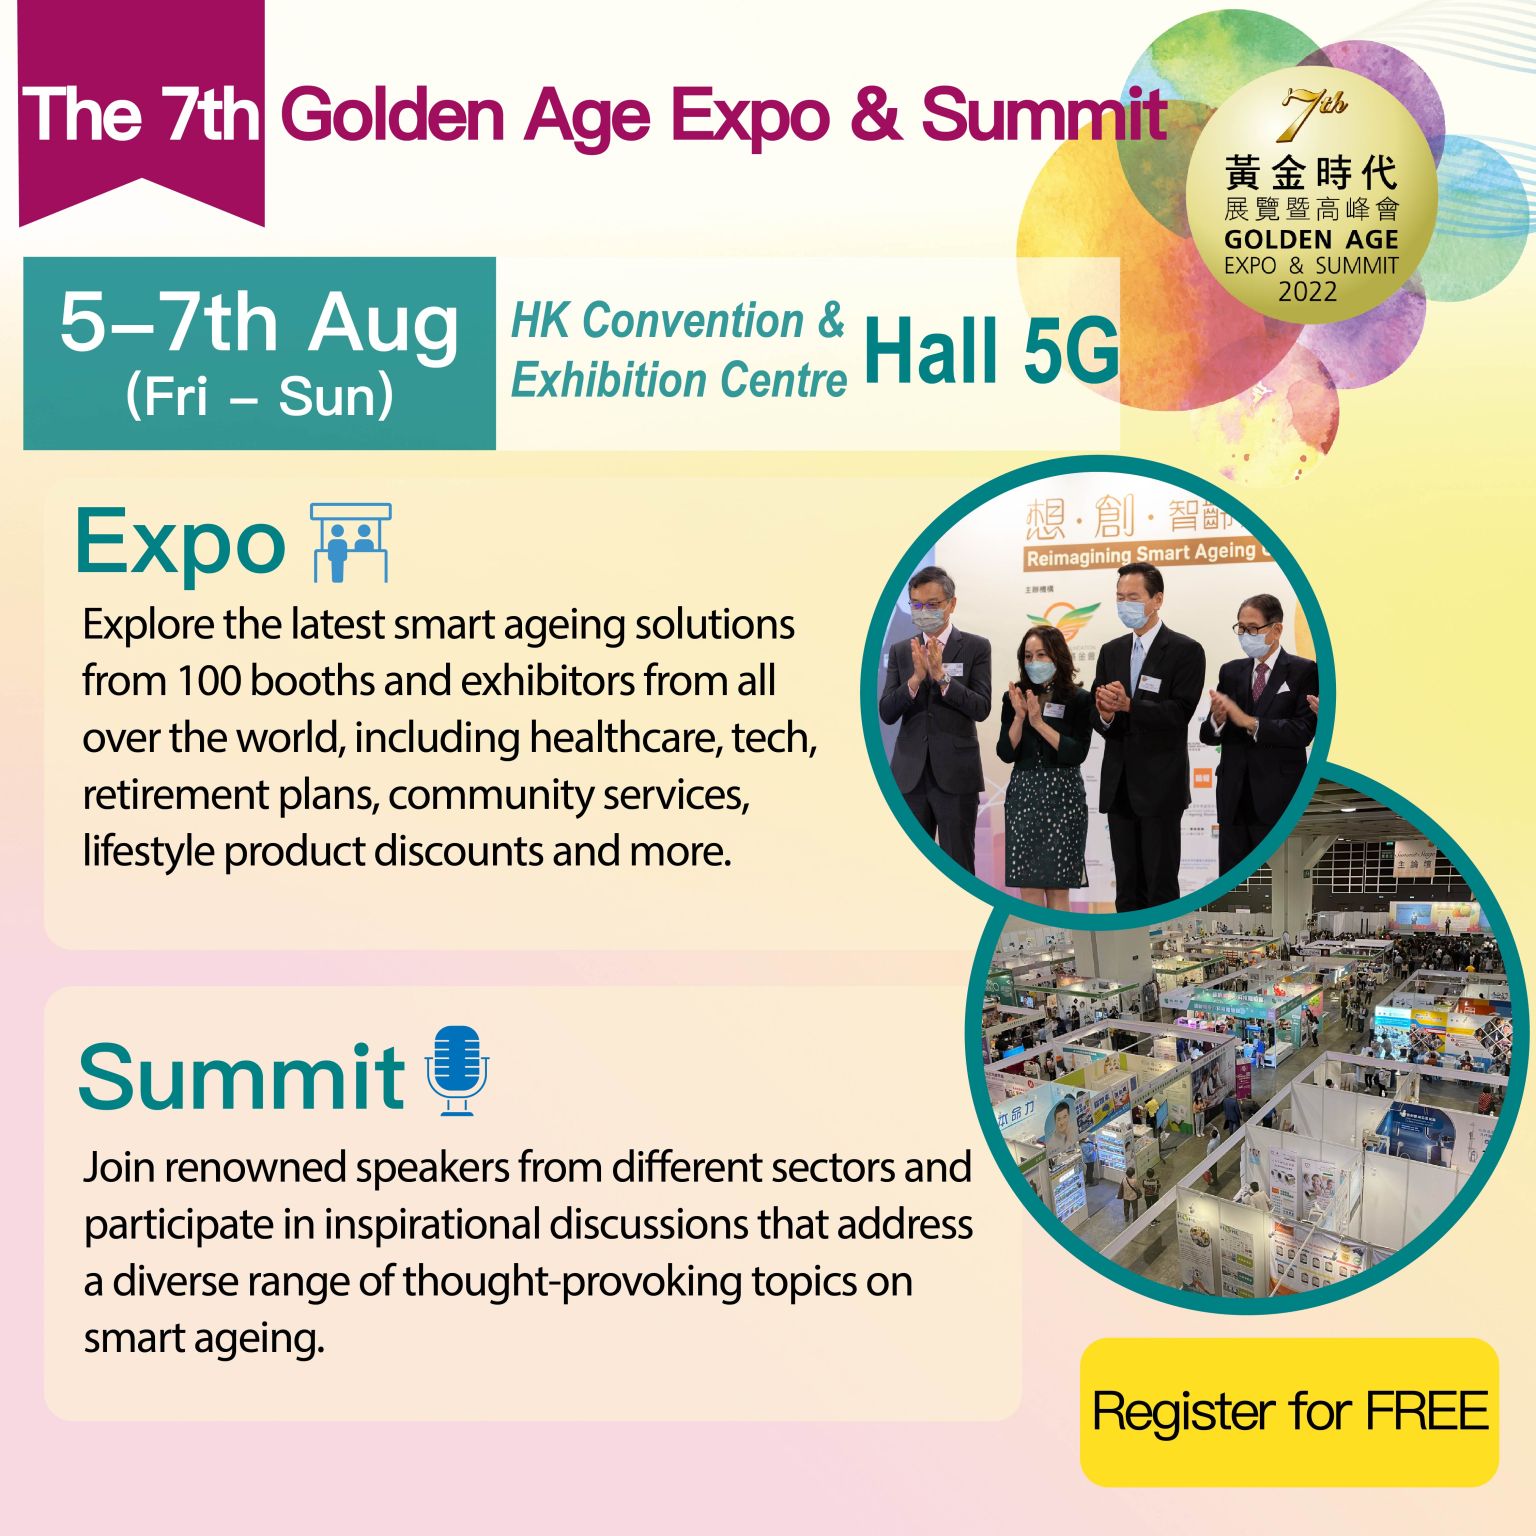 EOC supports 7th Golden Age Expo and Summit